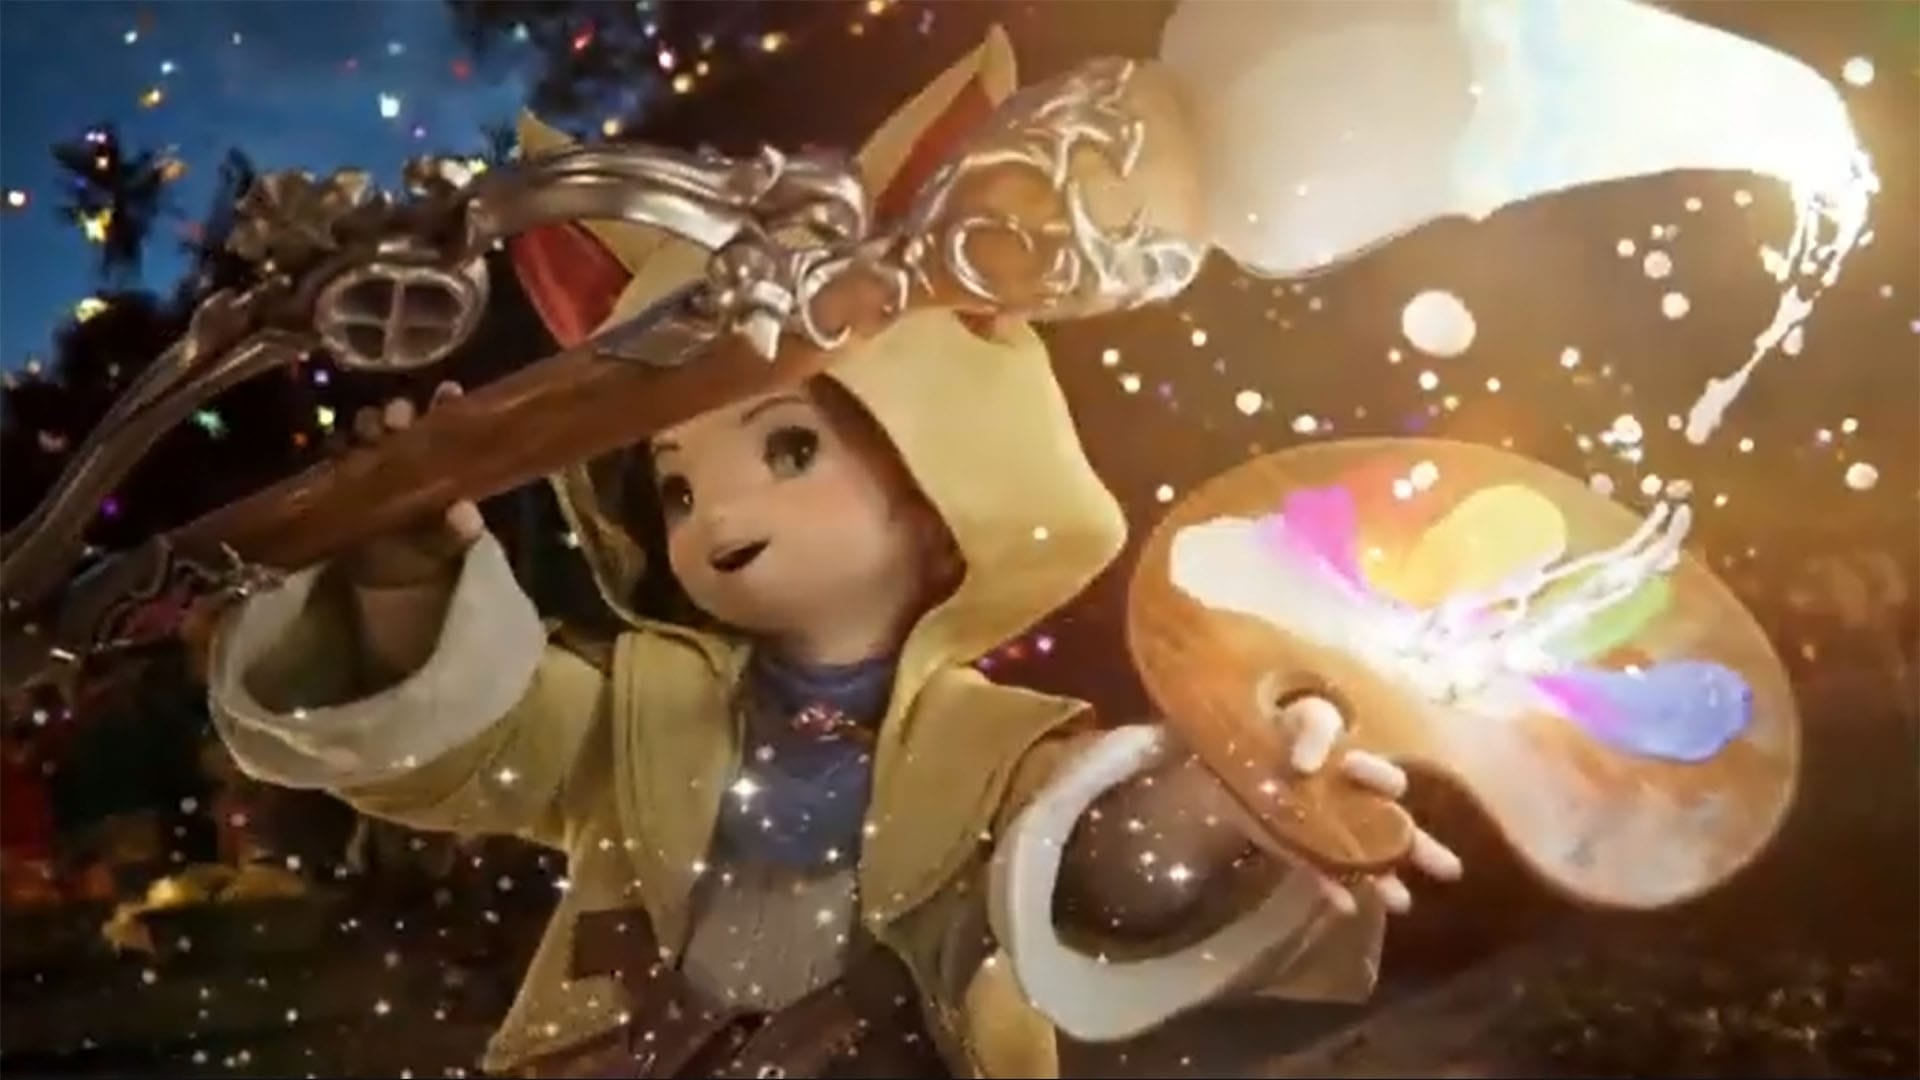 Final Fantasy XIV Expansion Dawntrail Reveals New Job Pictomancer With Spectacular Trailer